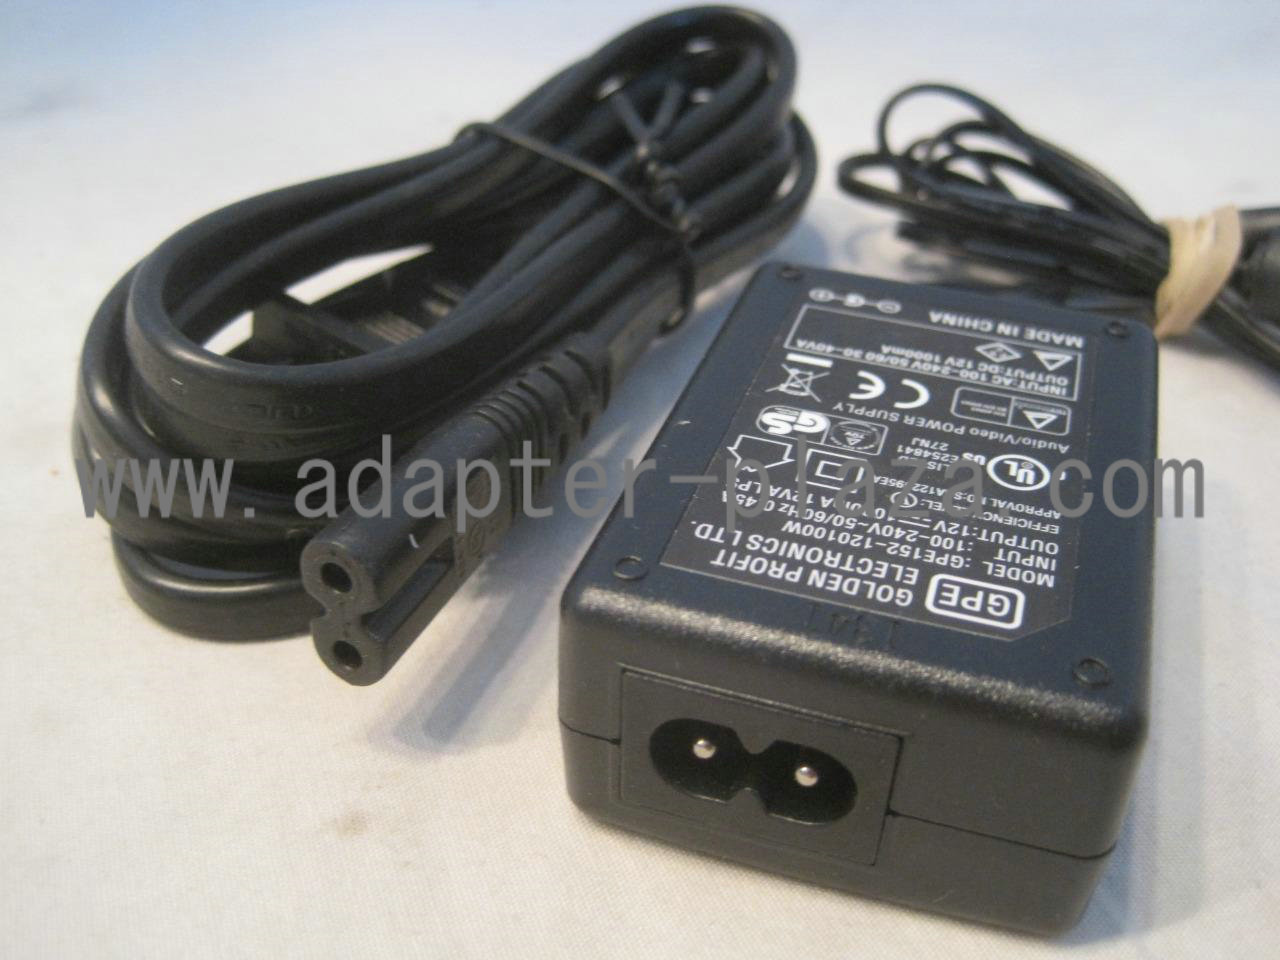 New 12V 1A MAINS GPE GPE152-120100W PSU PART AC ADAPTOR POWER SUPPLY CHARGER